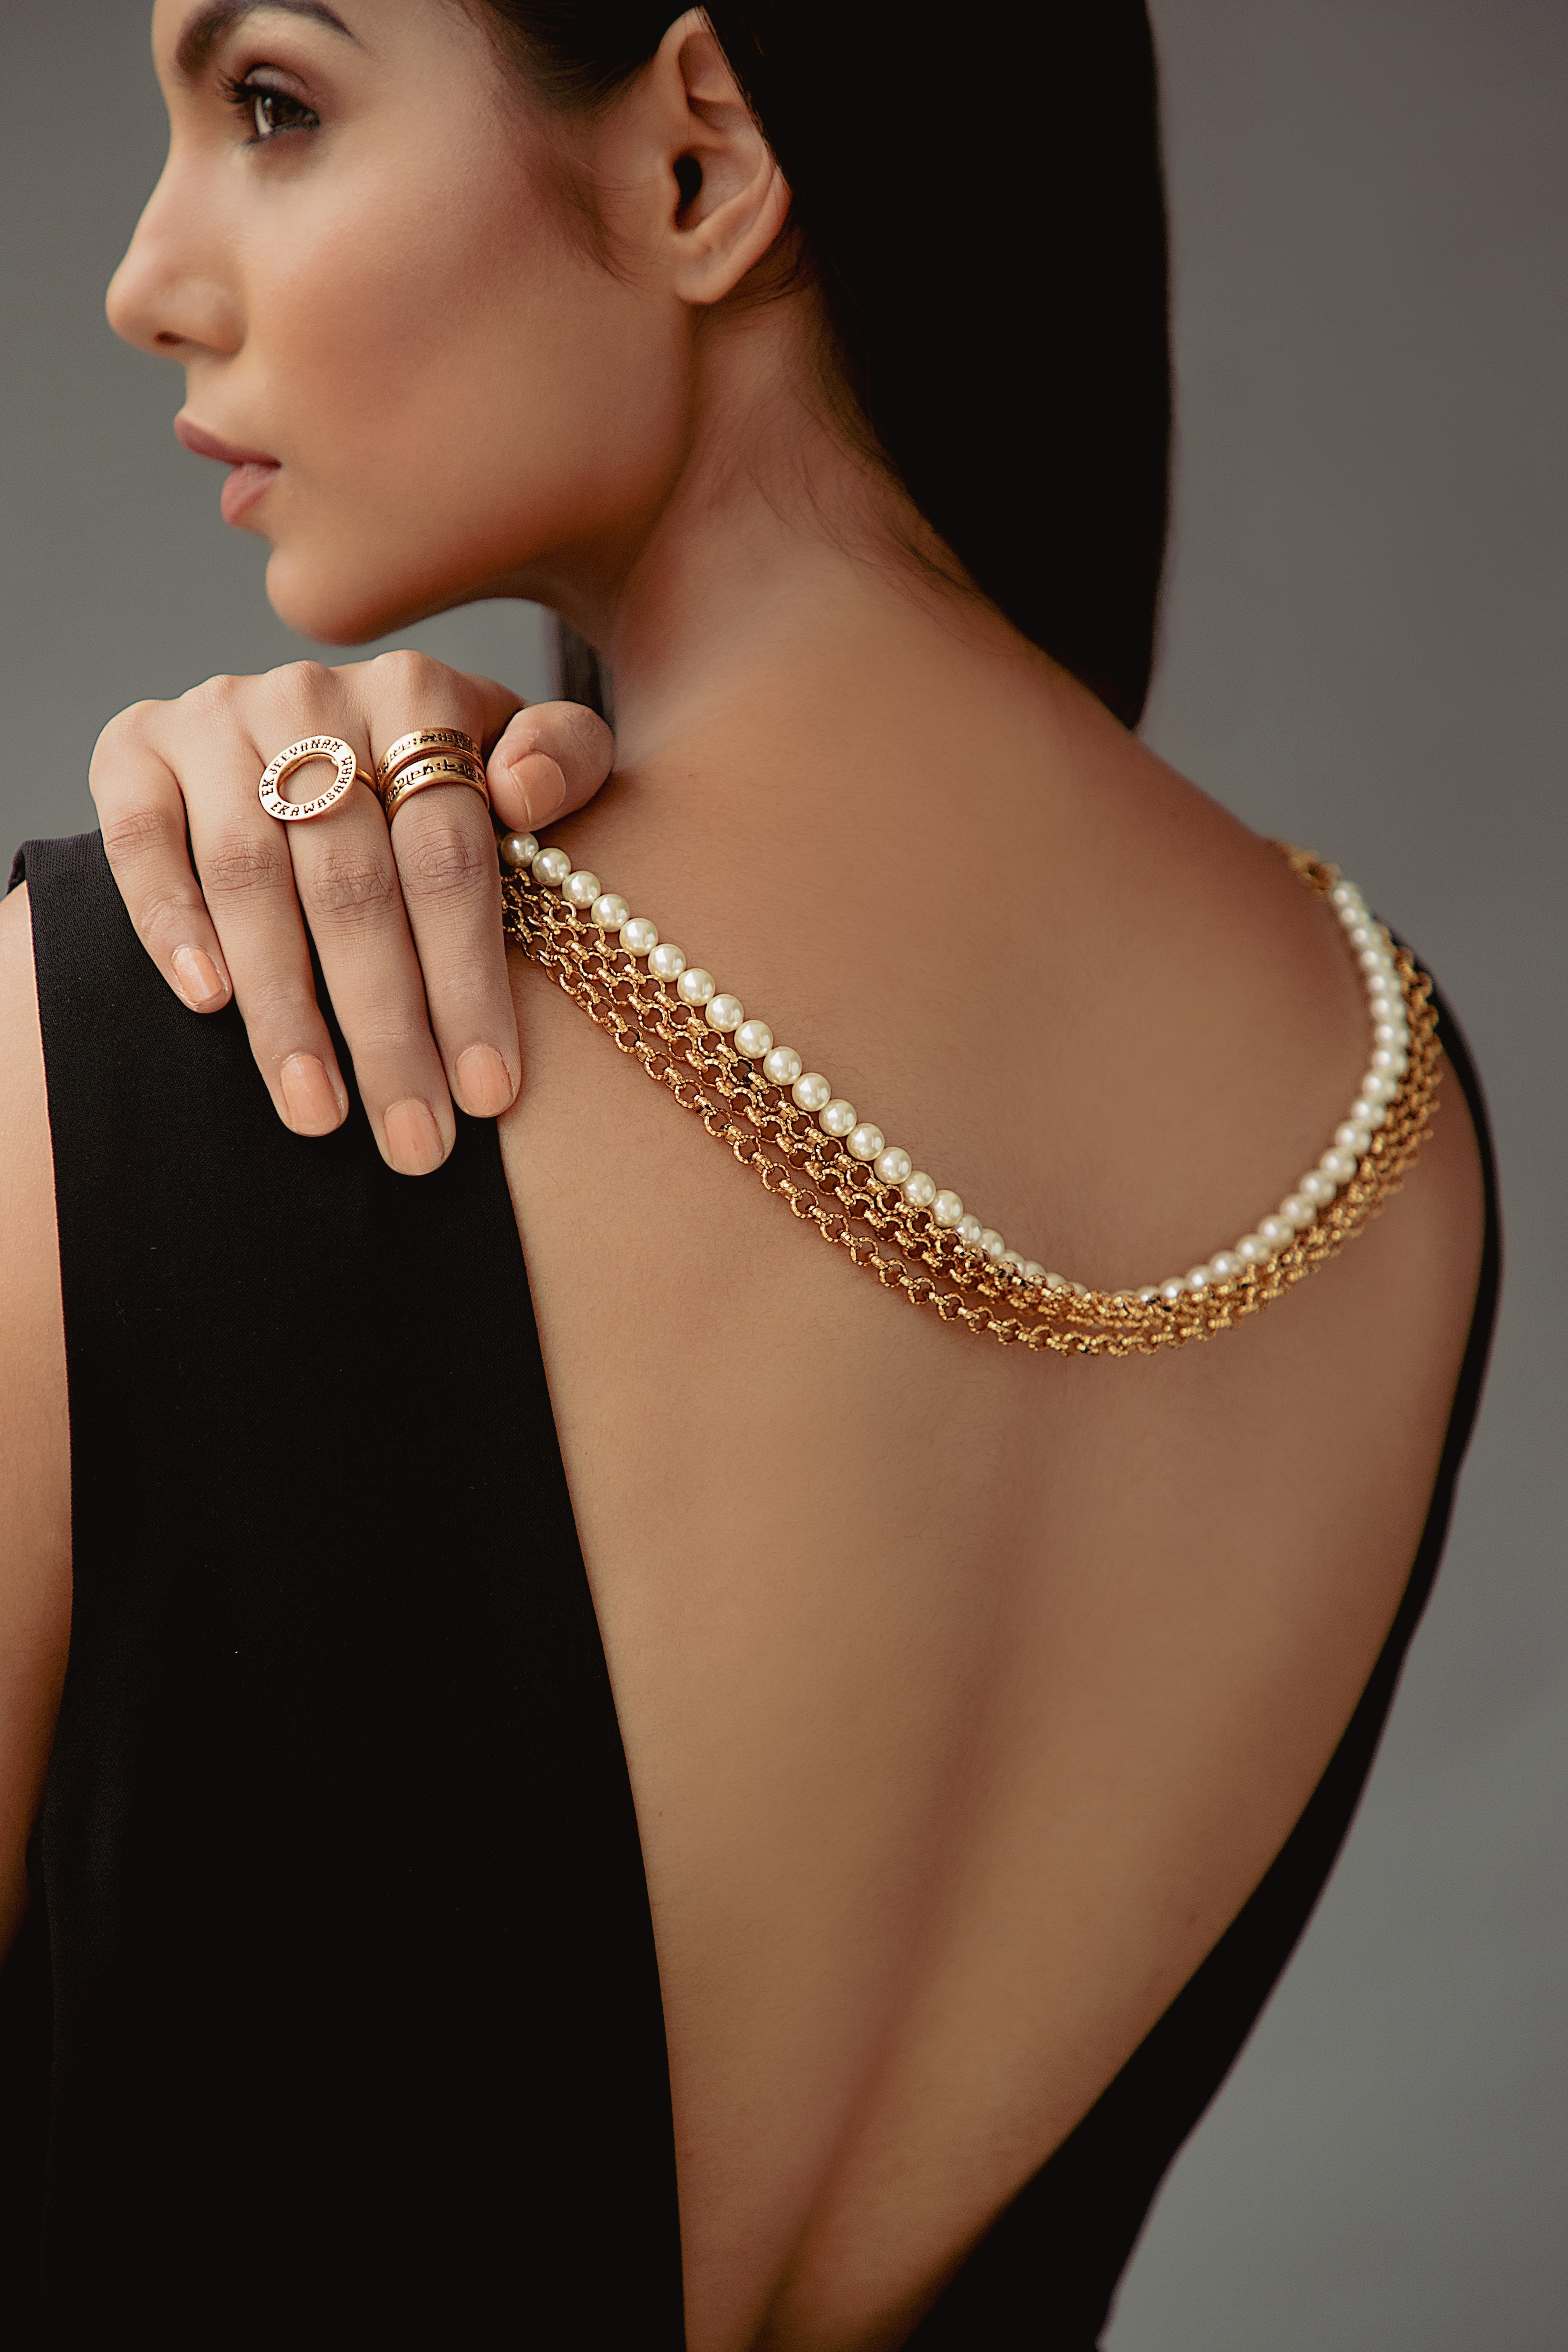 PARISHRI JEWELLERY | THE PEARLY CHAIN HANGING undefined